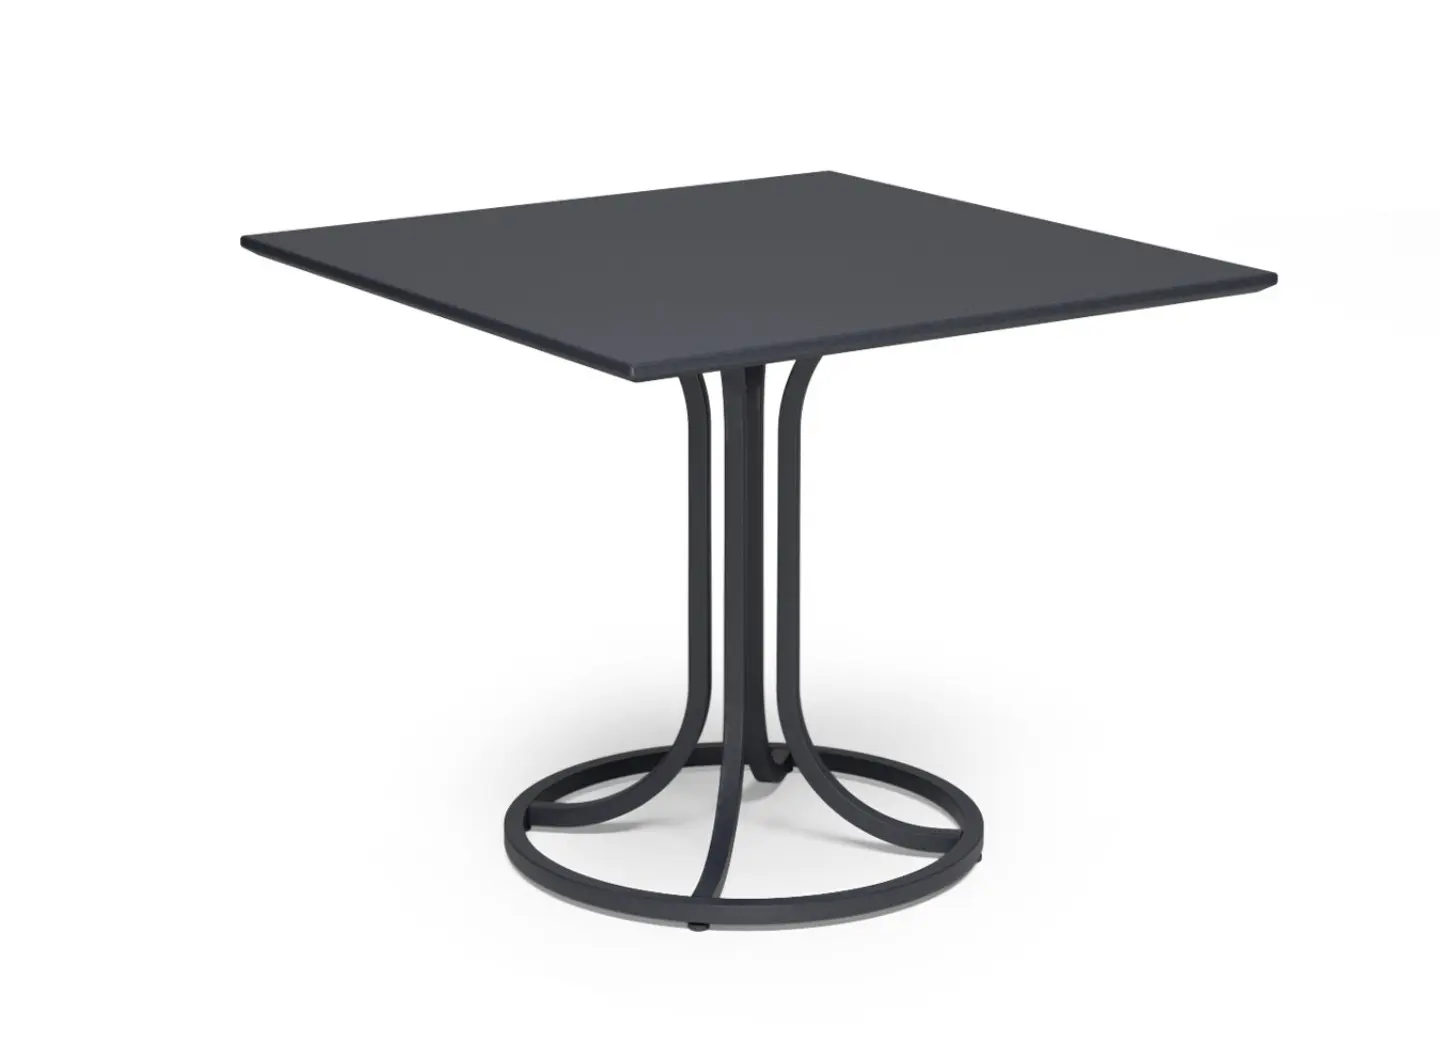 EMU | Collier Square Table